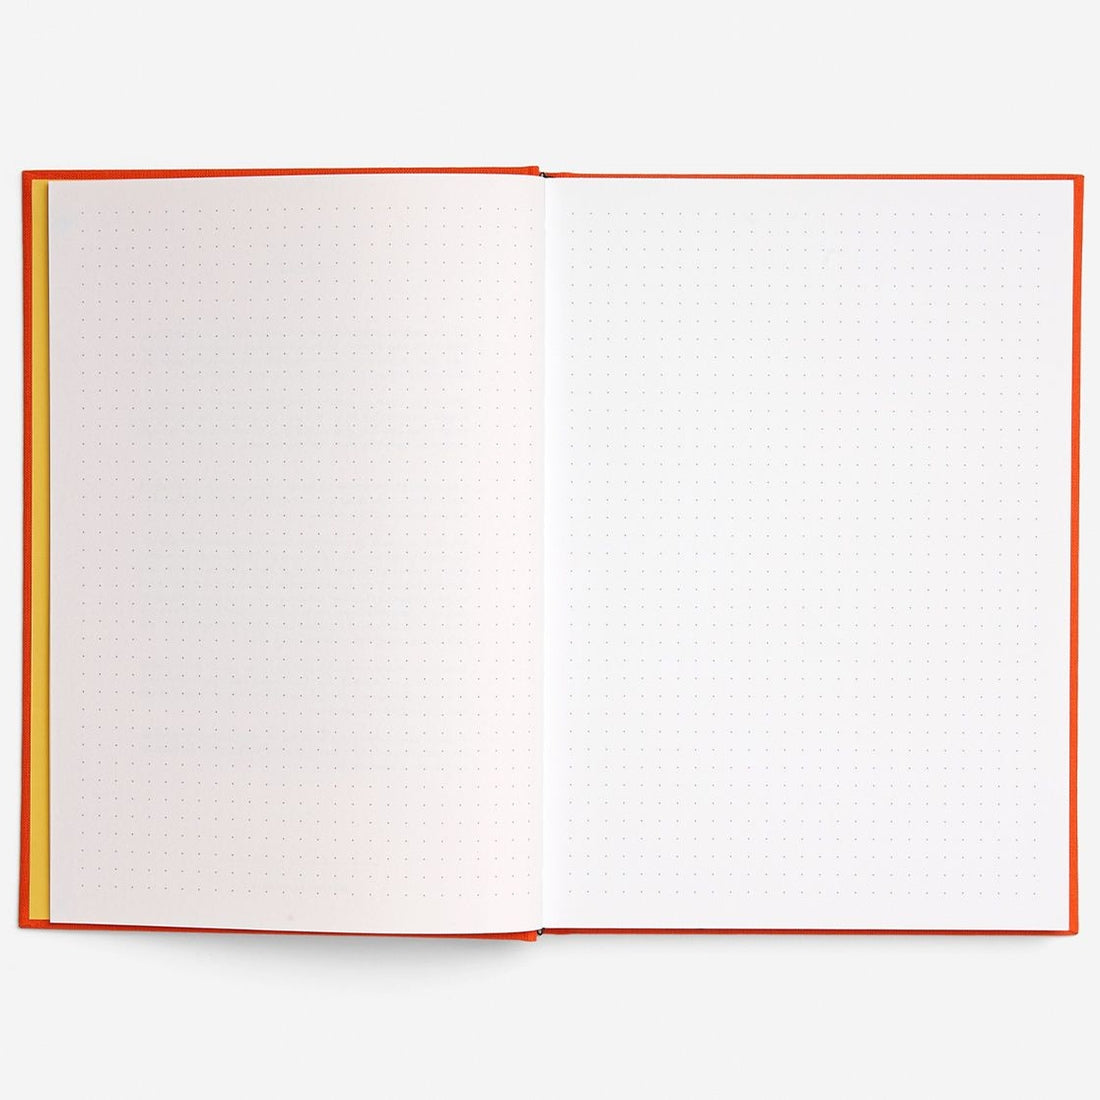 Ideas Notebook, The School of Life